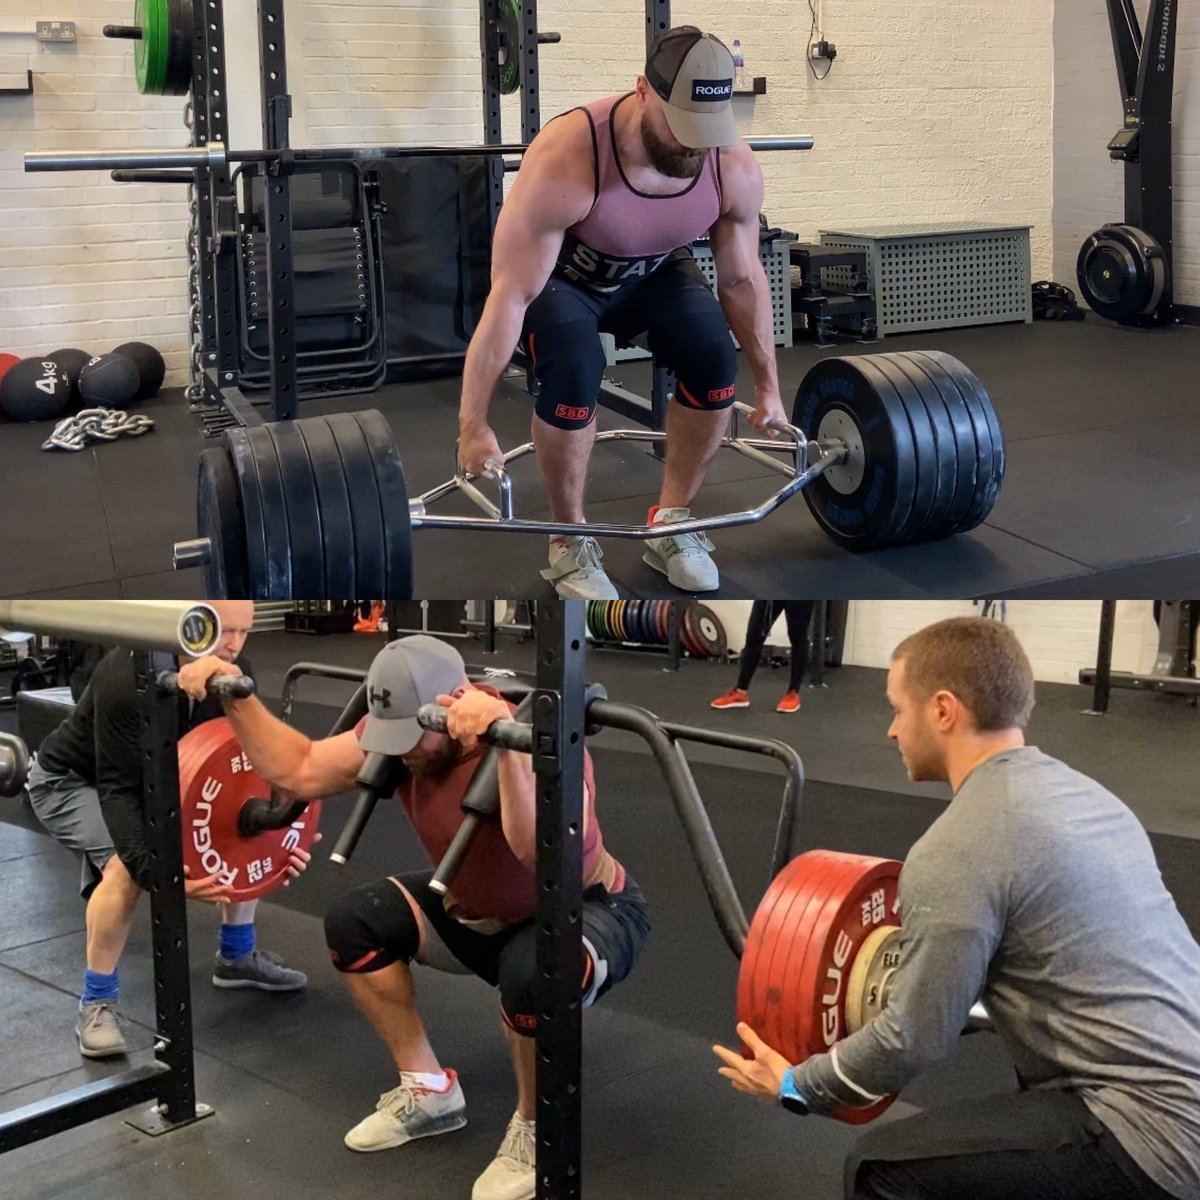 I’m of the opinion that the two main pieces of lifting equipment that have impacted weight rooms significantly in the past decade are the Trapbar & Safety Bar. Low technical overhead, comfort & adaptability, means we can get away from the rigidity of conventional bar sport lifts.